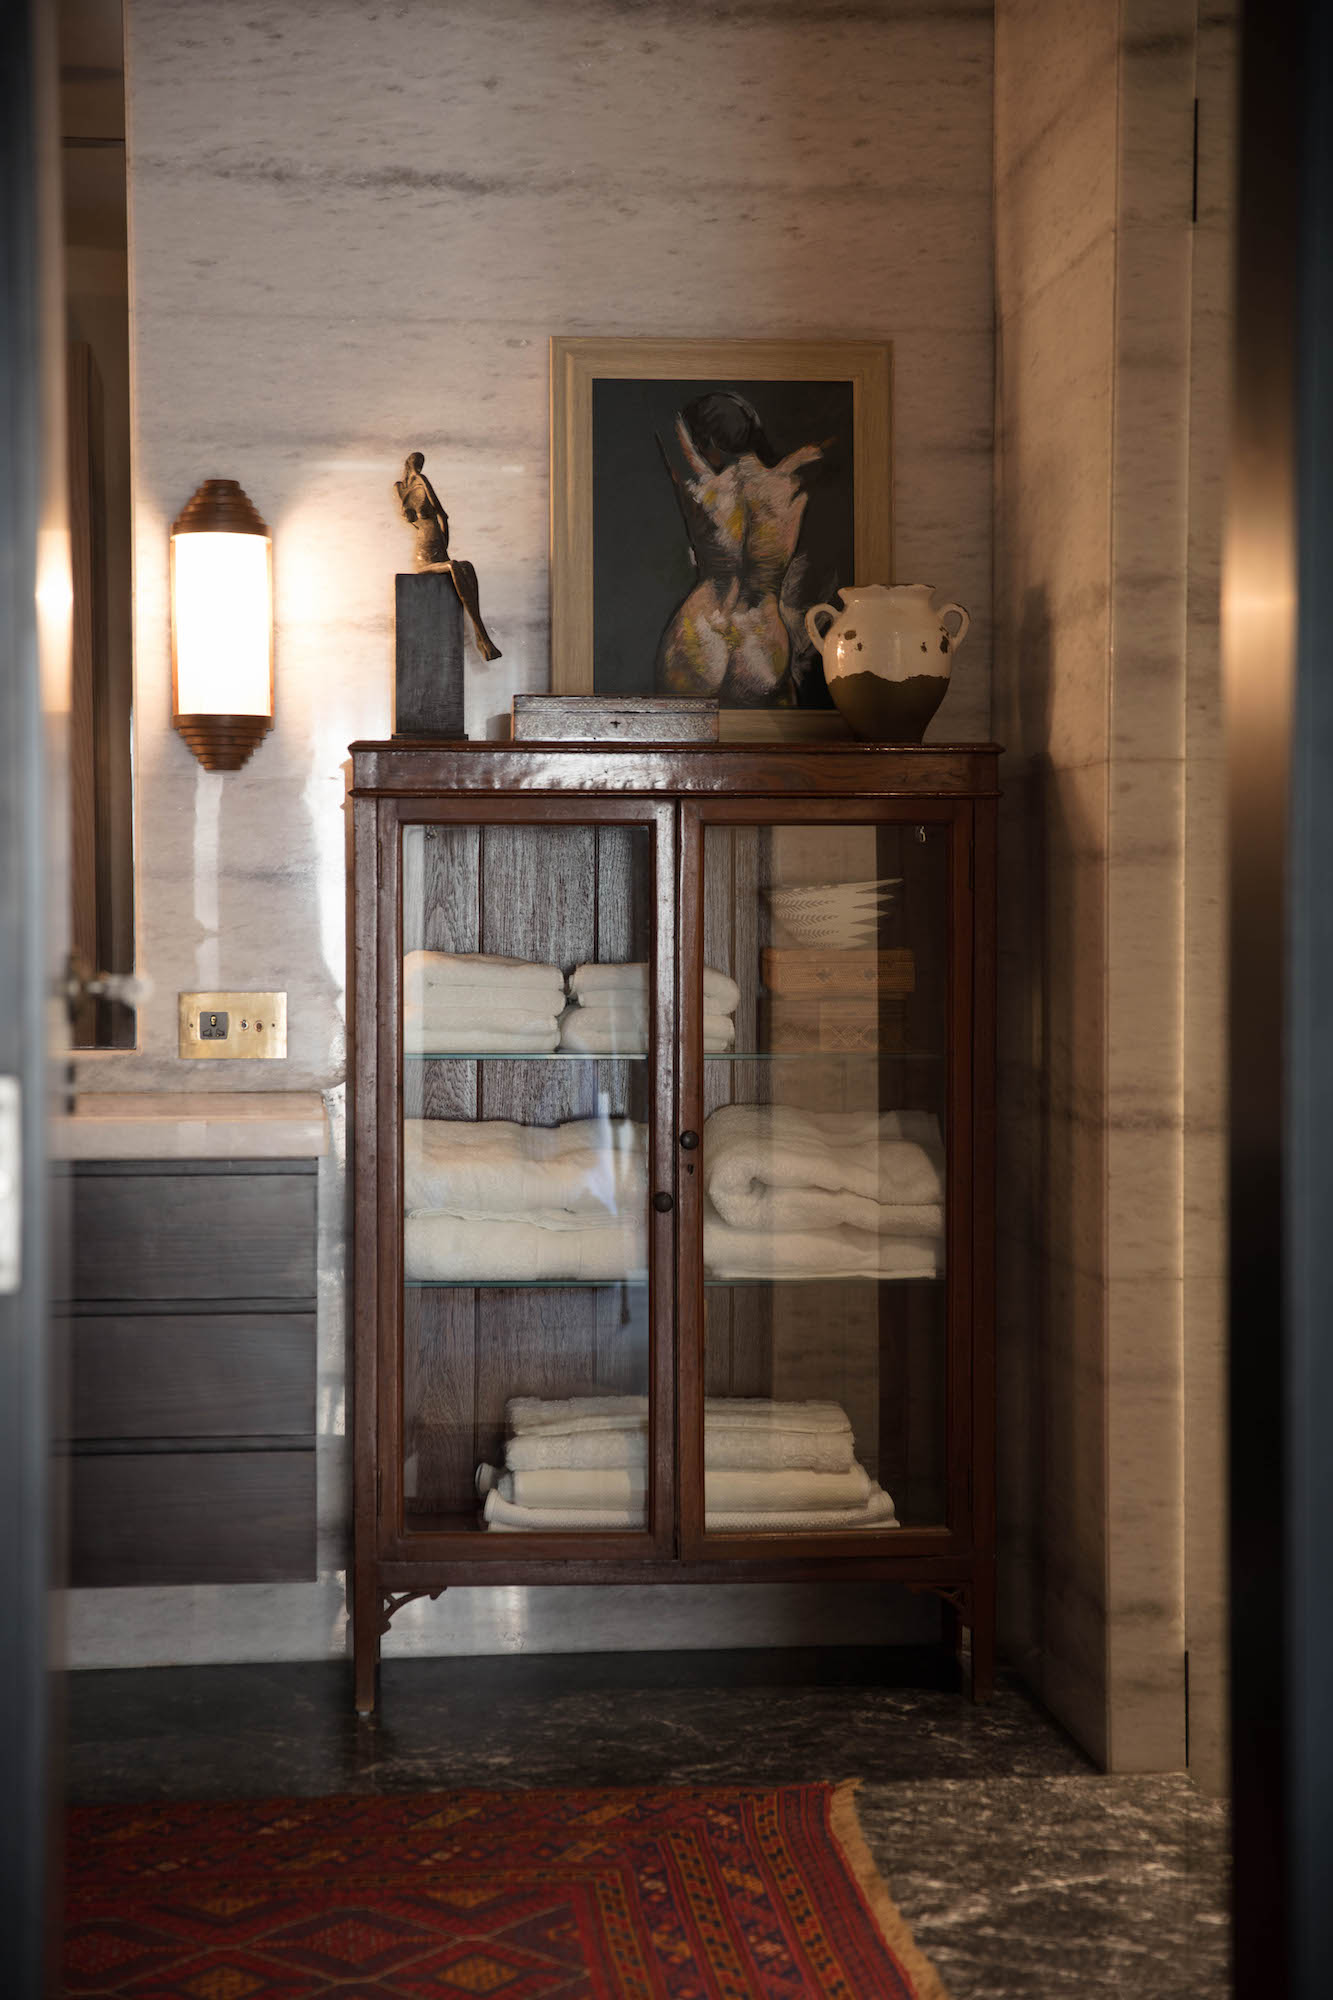 A traditional wood and glass bathroom cabinet with ceramics and art objects by Indian designer Ravi Vazirani